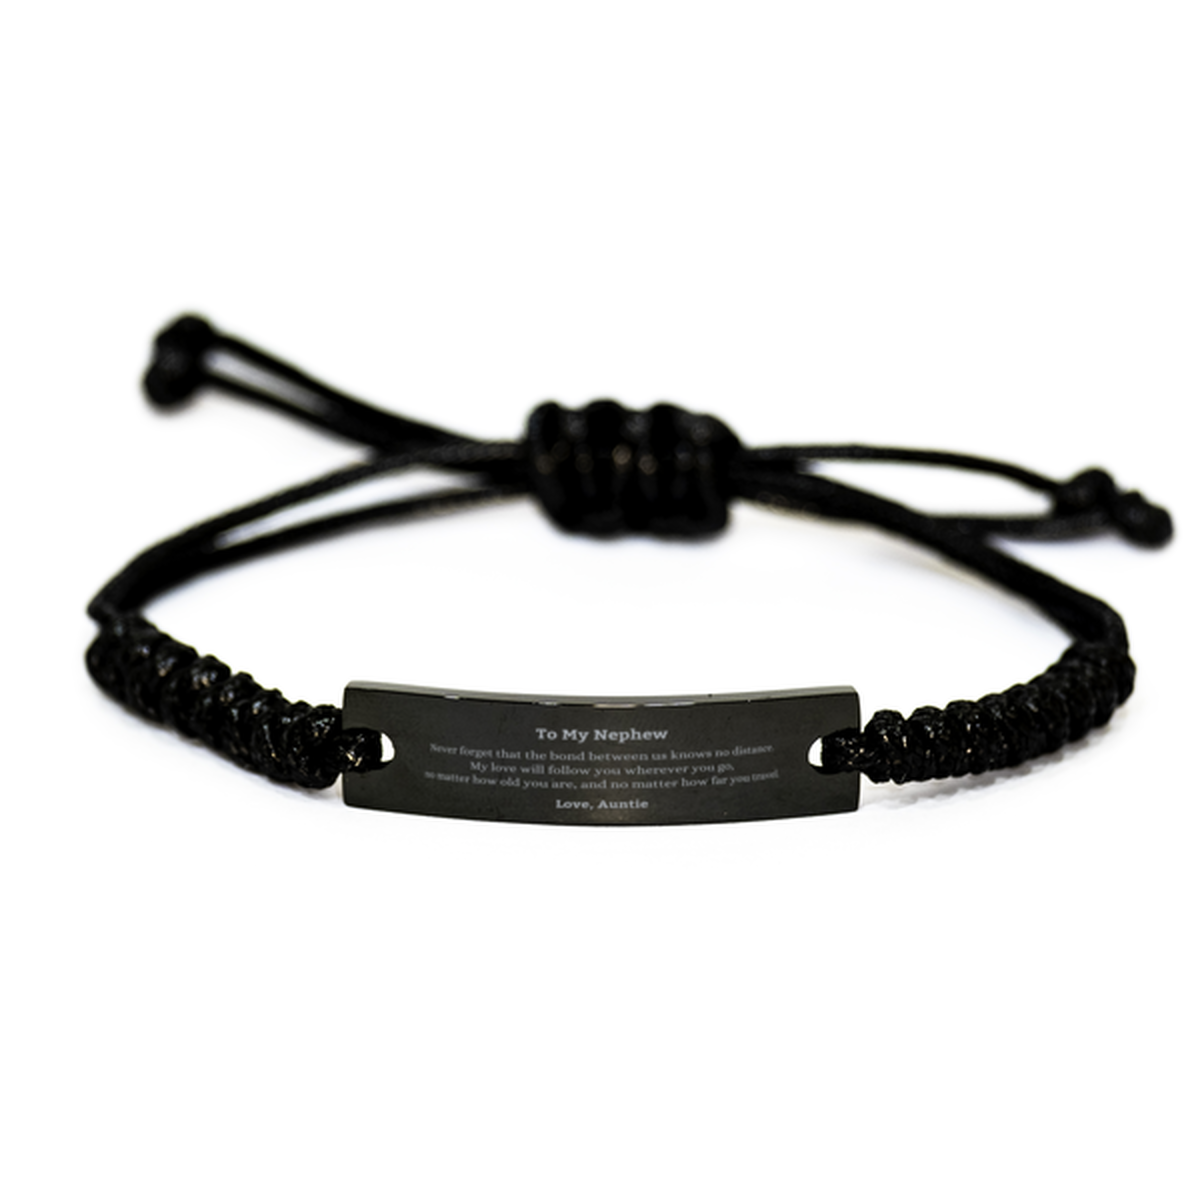 Nephew Birthday Gifts from Auntie, Adjustable Black Rope Bracelet for Nephew Christmas Graduation Unique Gifts Nephew Never forget that the bond between us knows no distance. Love, Auntie